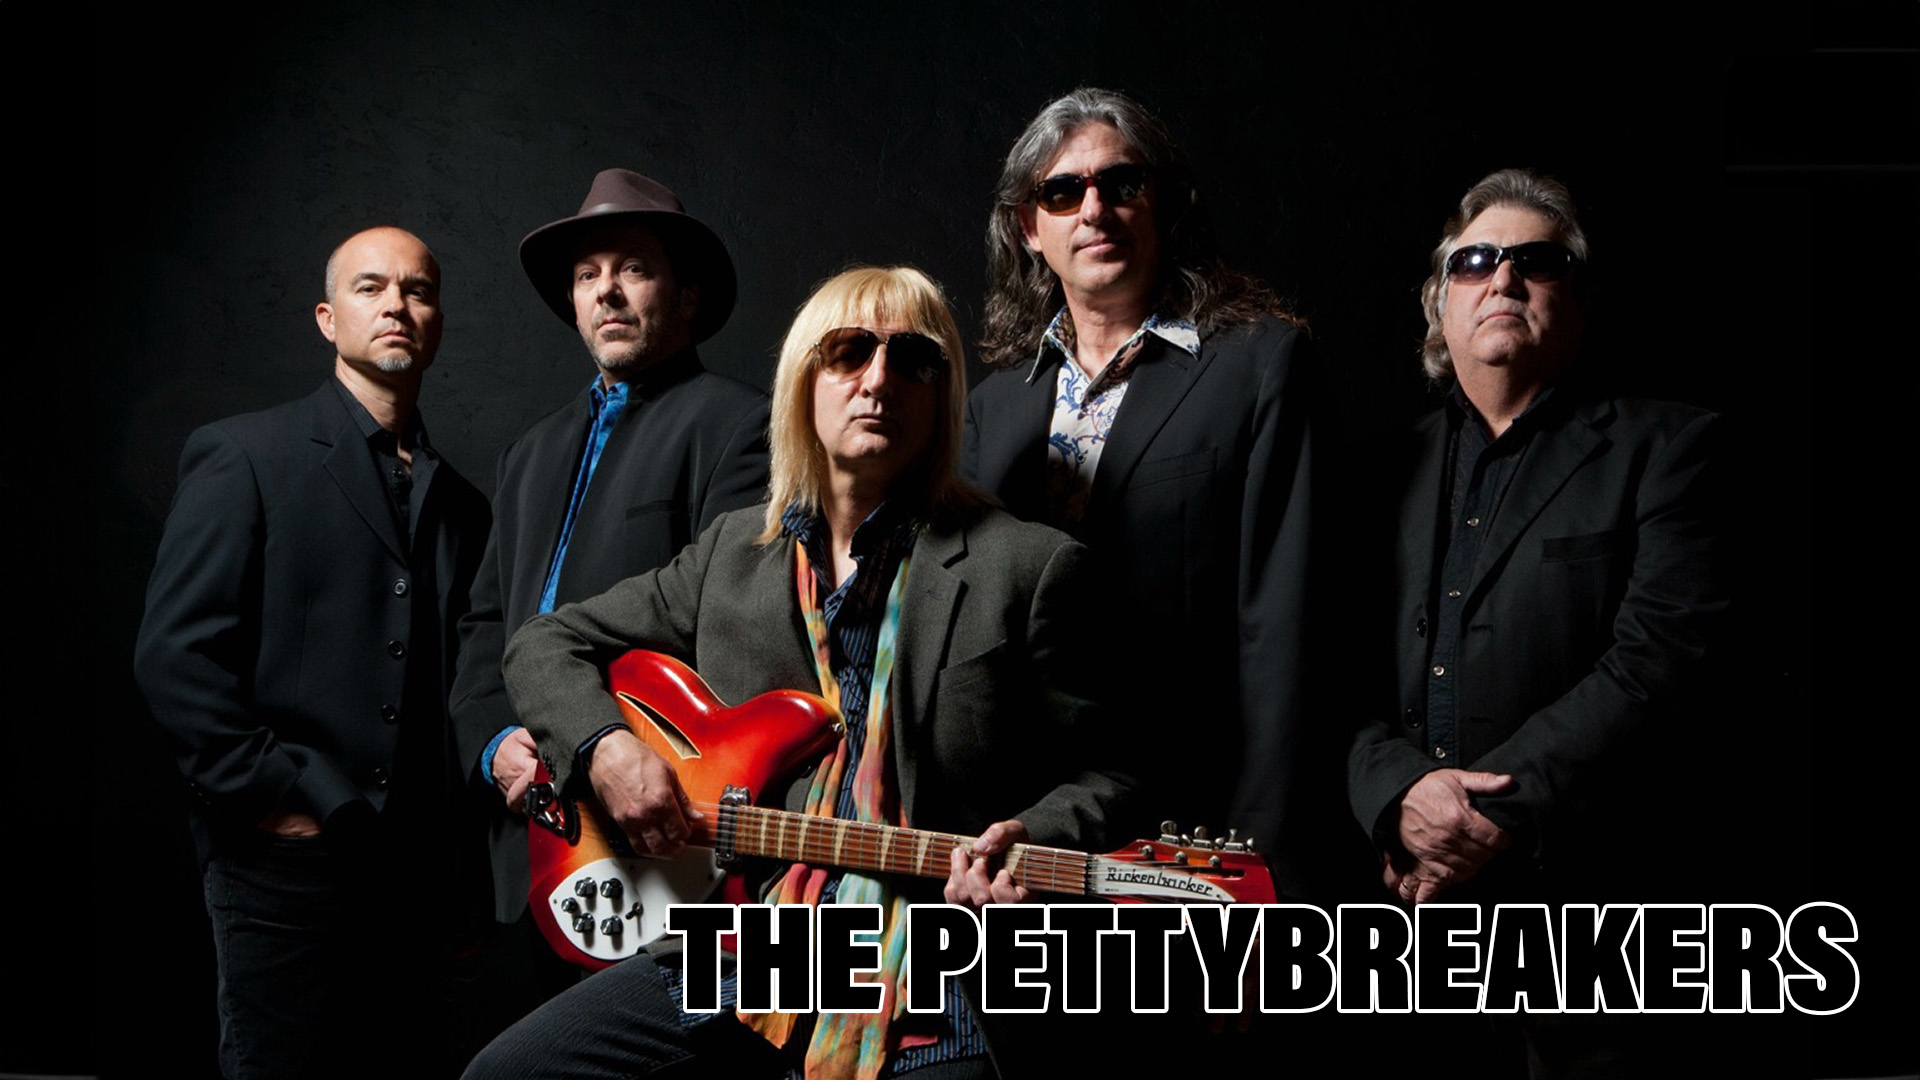 The Pettybreakers